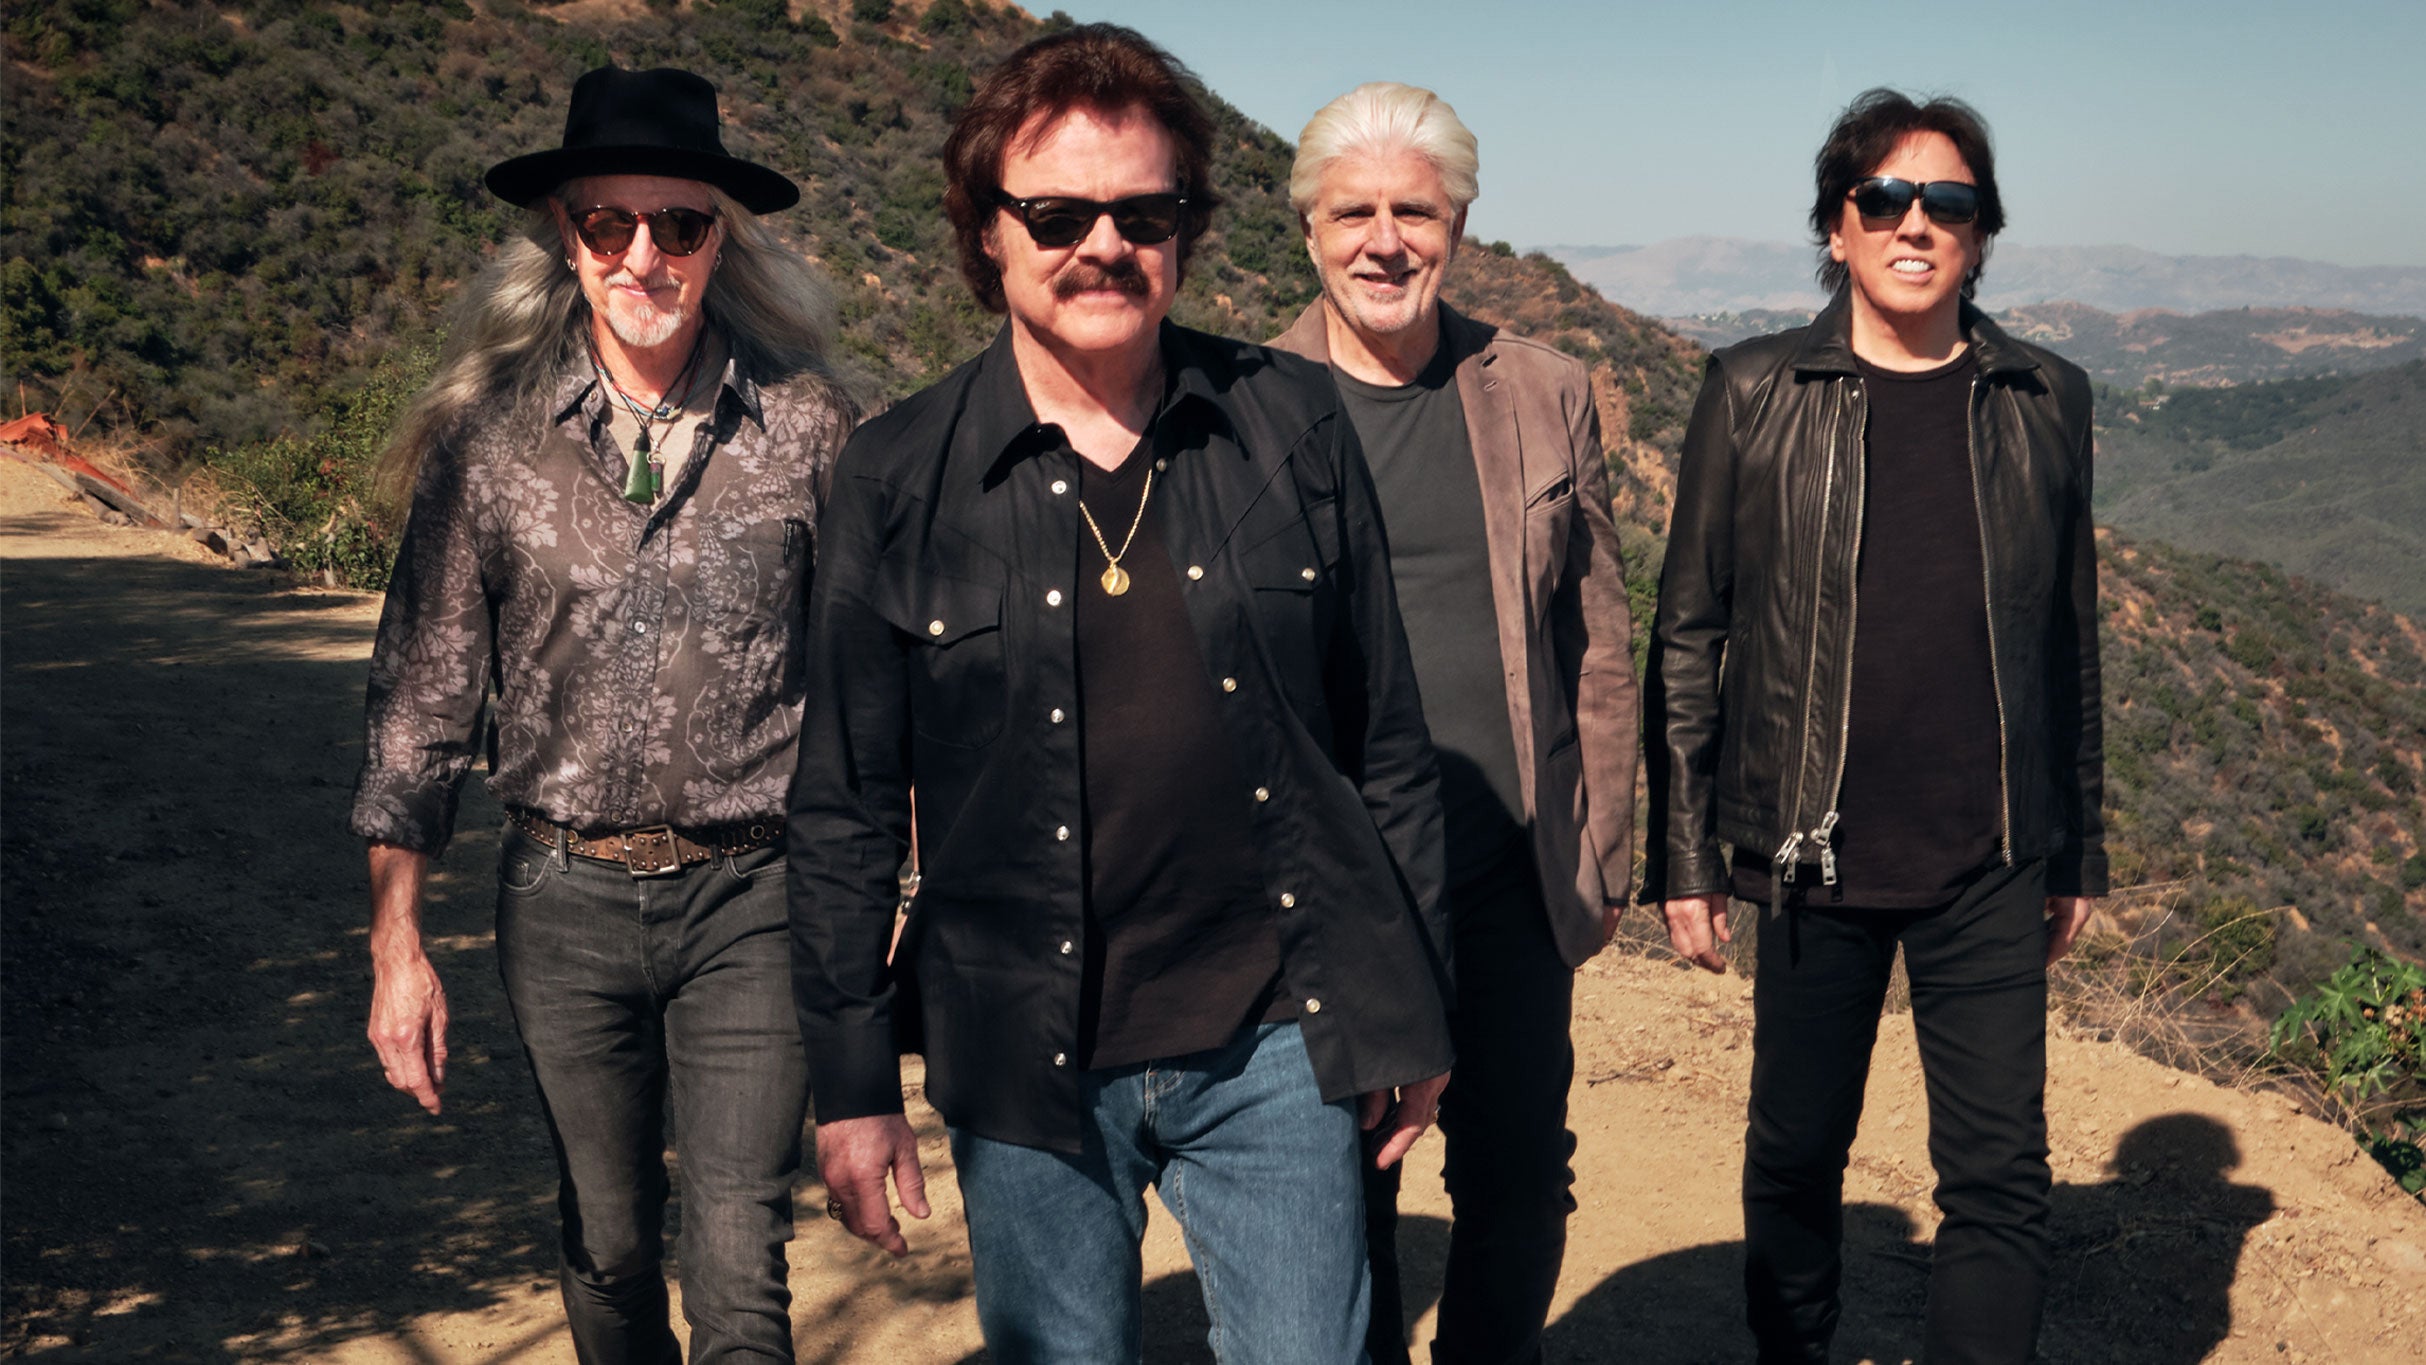 The Doobie Brothers free pre-sale code for early tickets in Macon